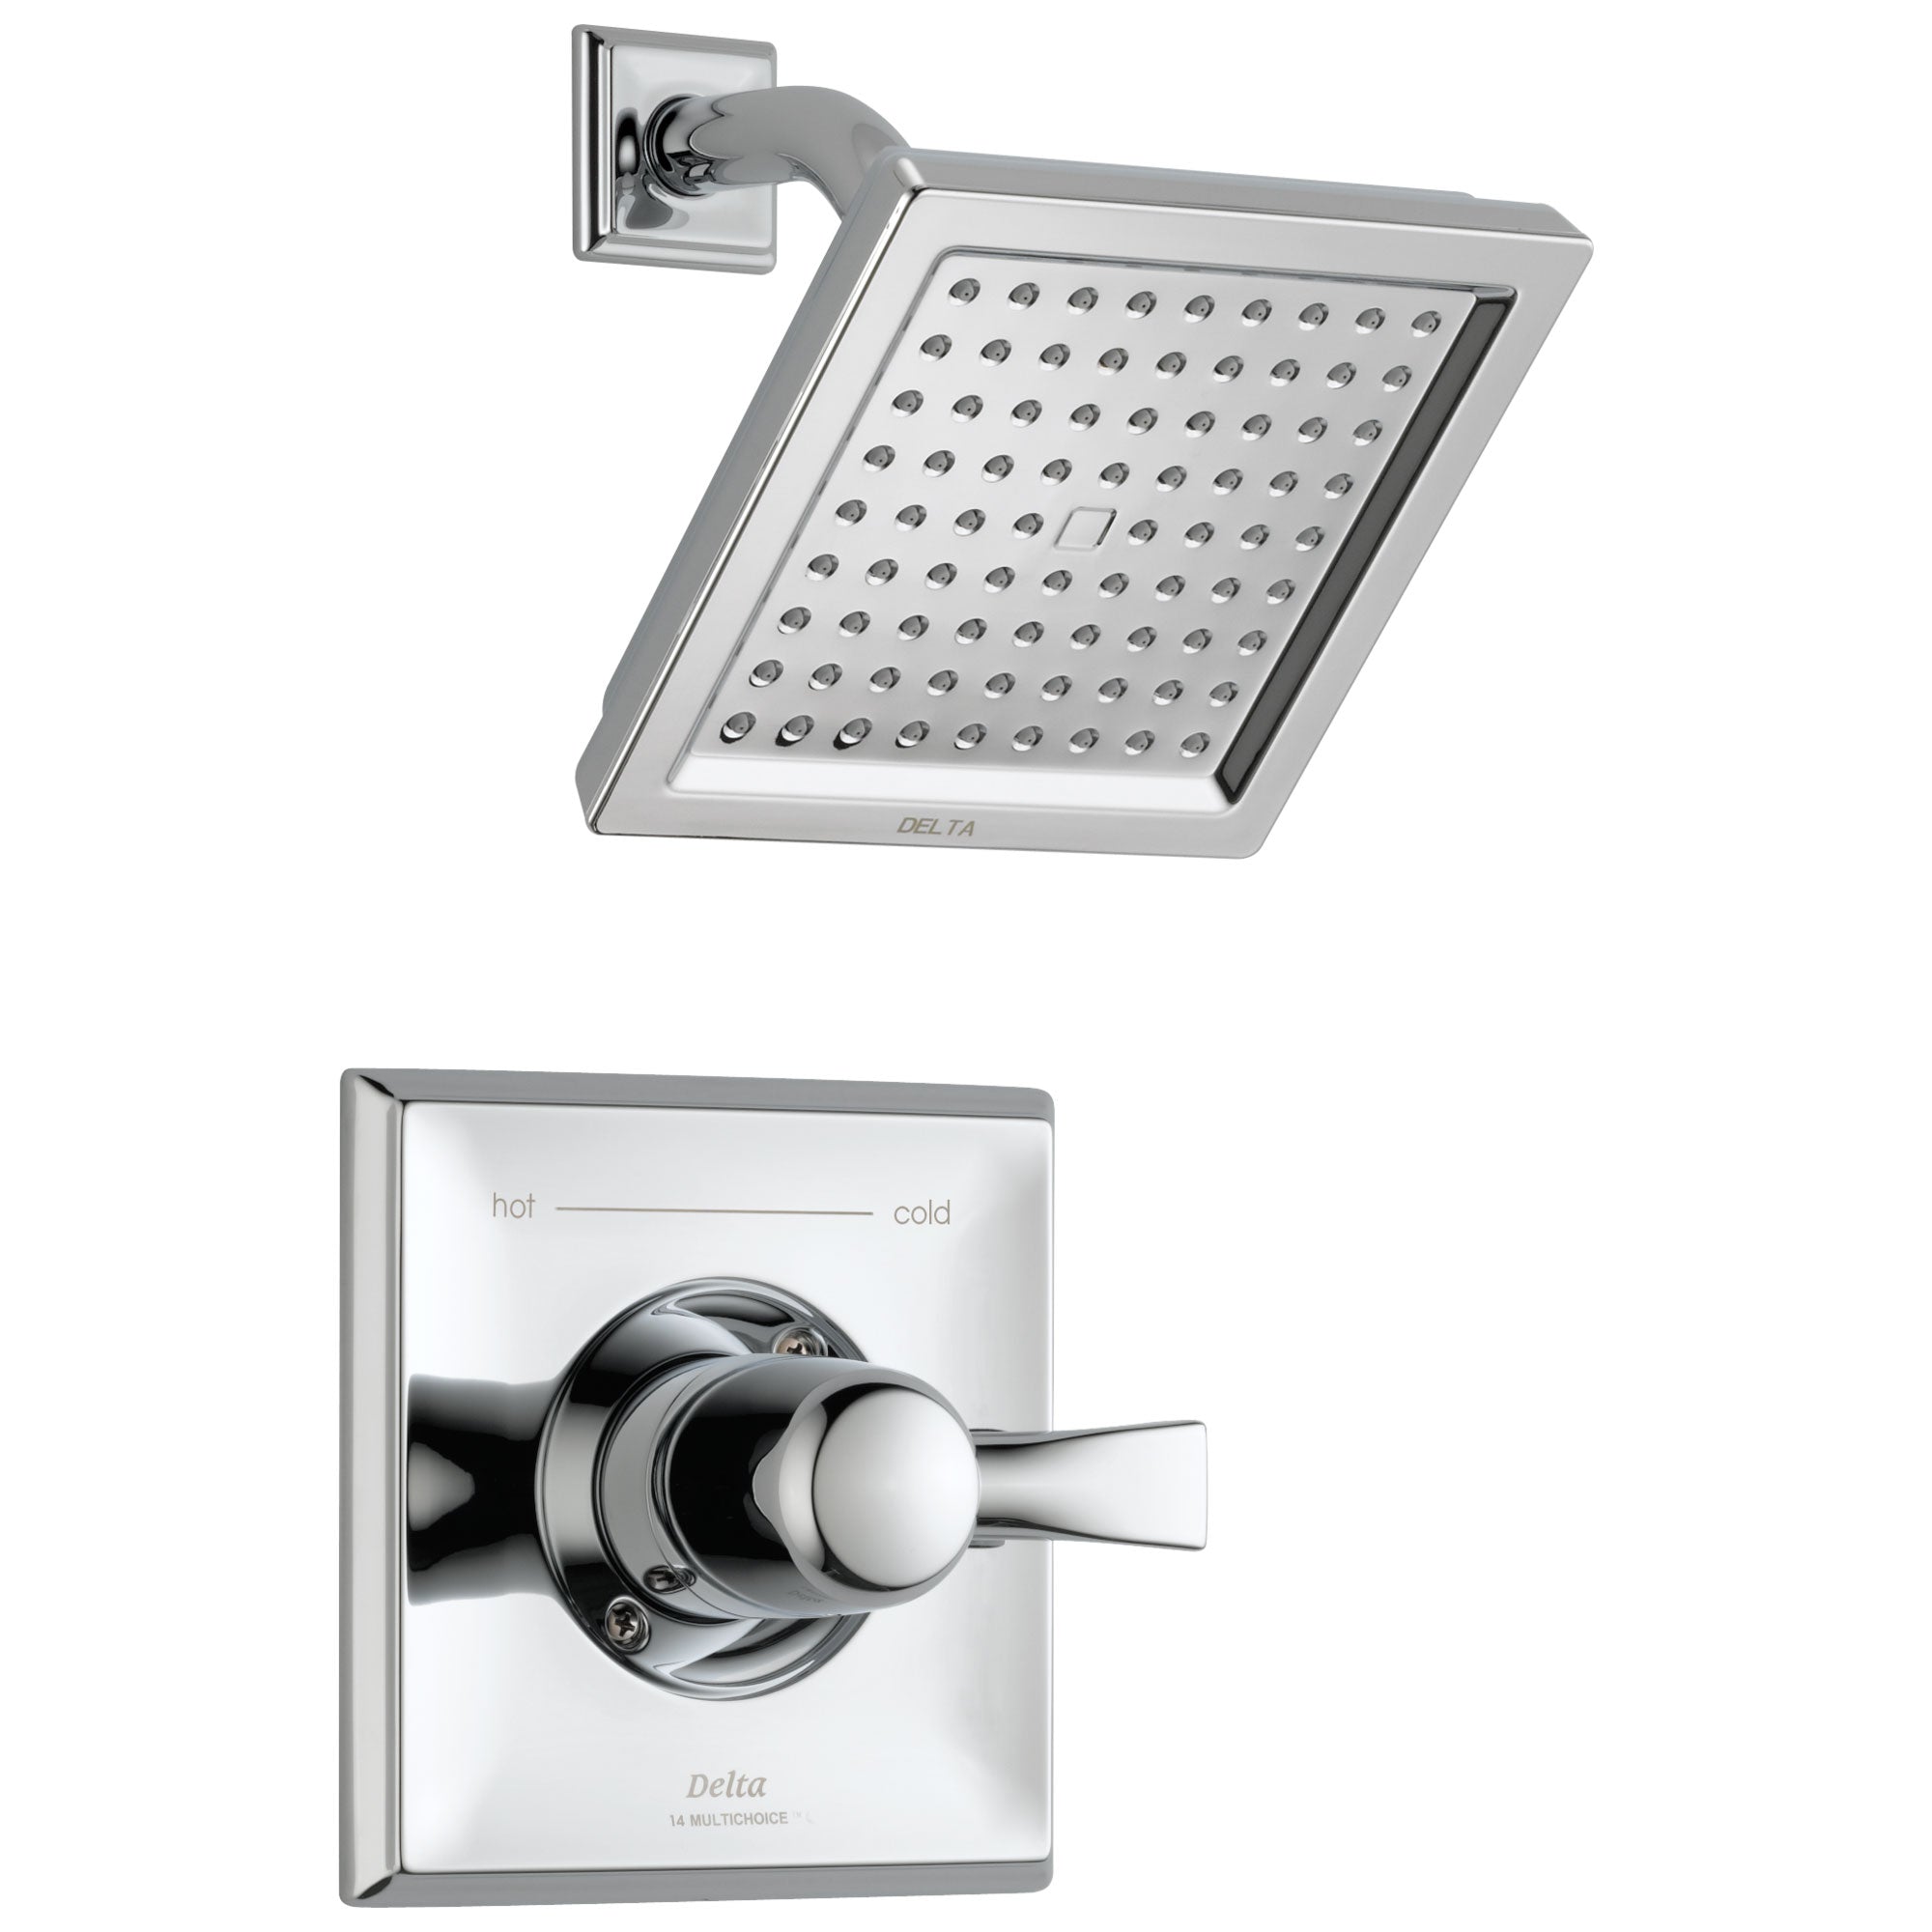 Delta Dryden Collection Chrome Finish Monitor 14 Series Water Efficient 1.75 GPM Square Shower only Faucet Includes Rough-in Valve without Stops D2465V